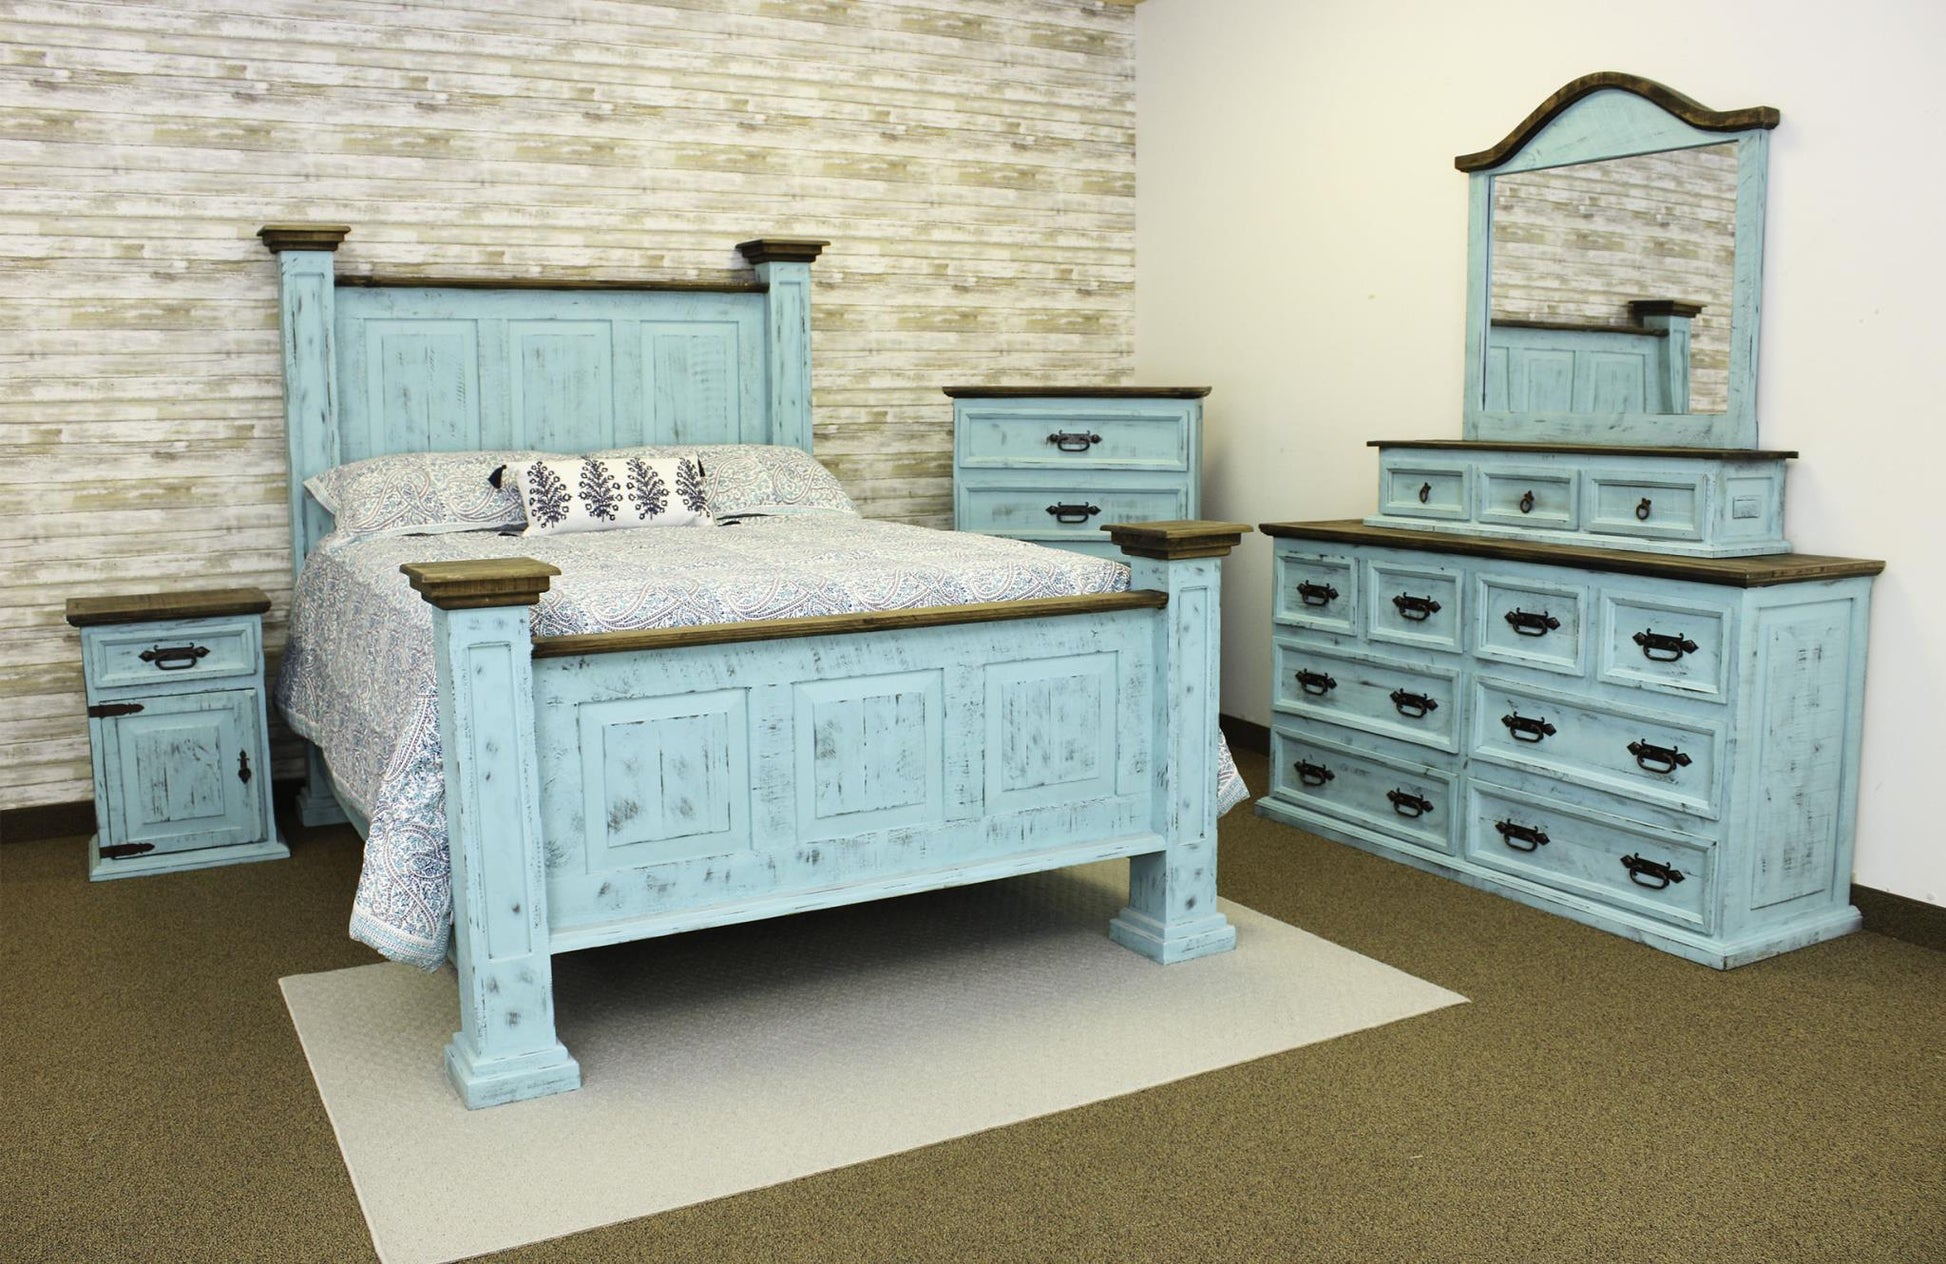 Rustic Turquoise Oasis Bedroom Set at Walker Mattress and Furniture Locations in Cedar Park and Belton TX.